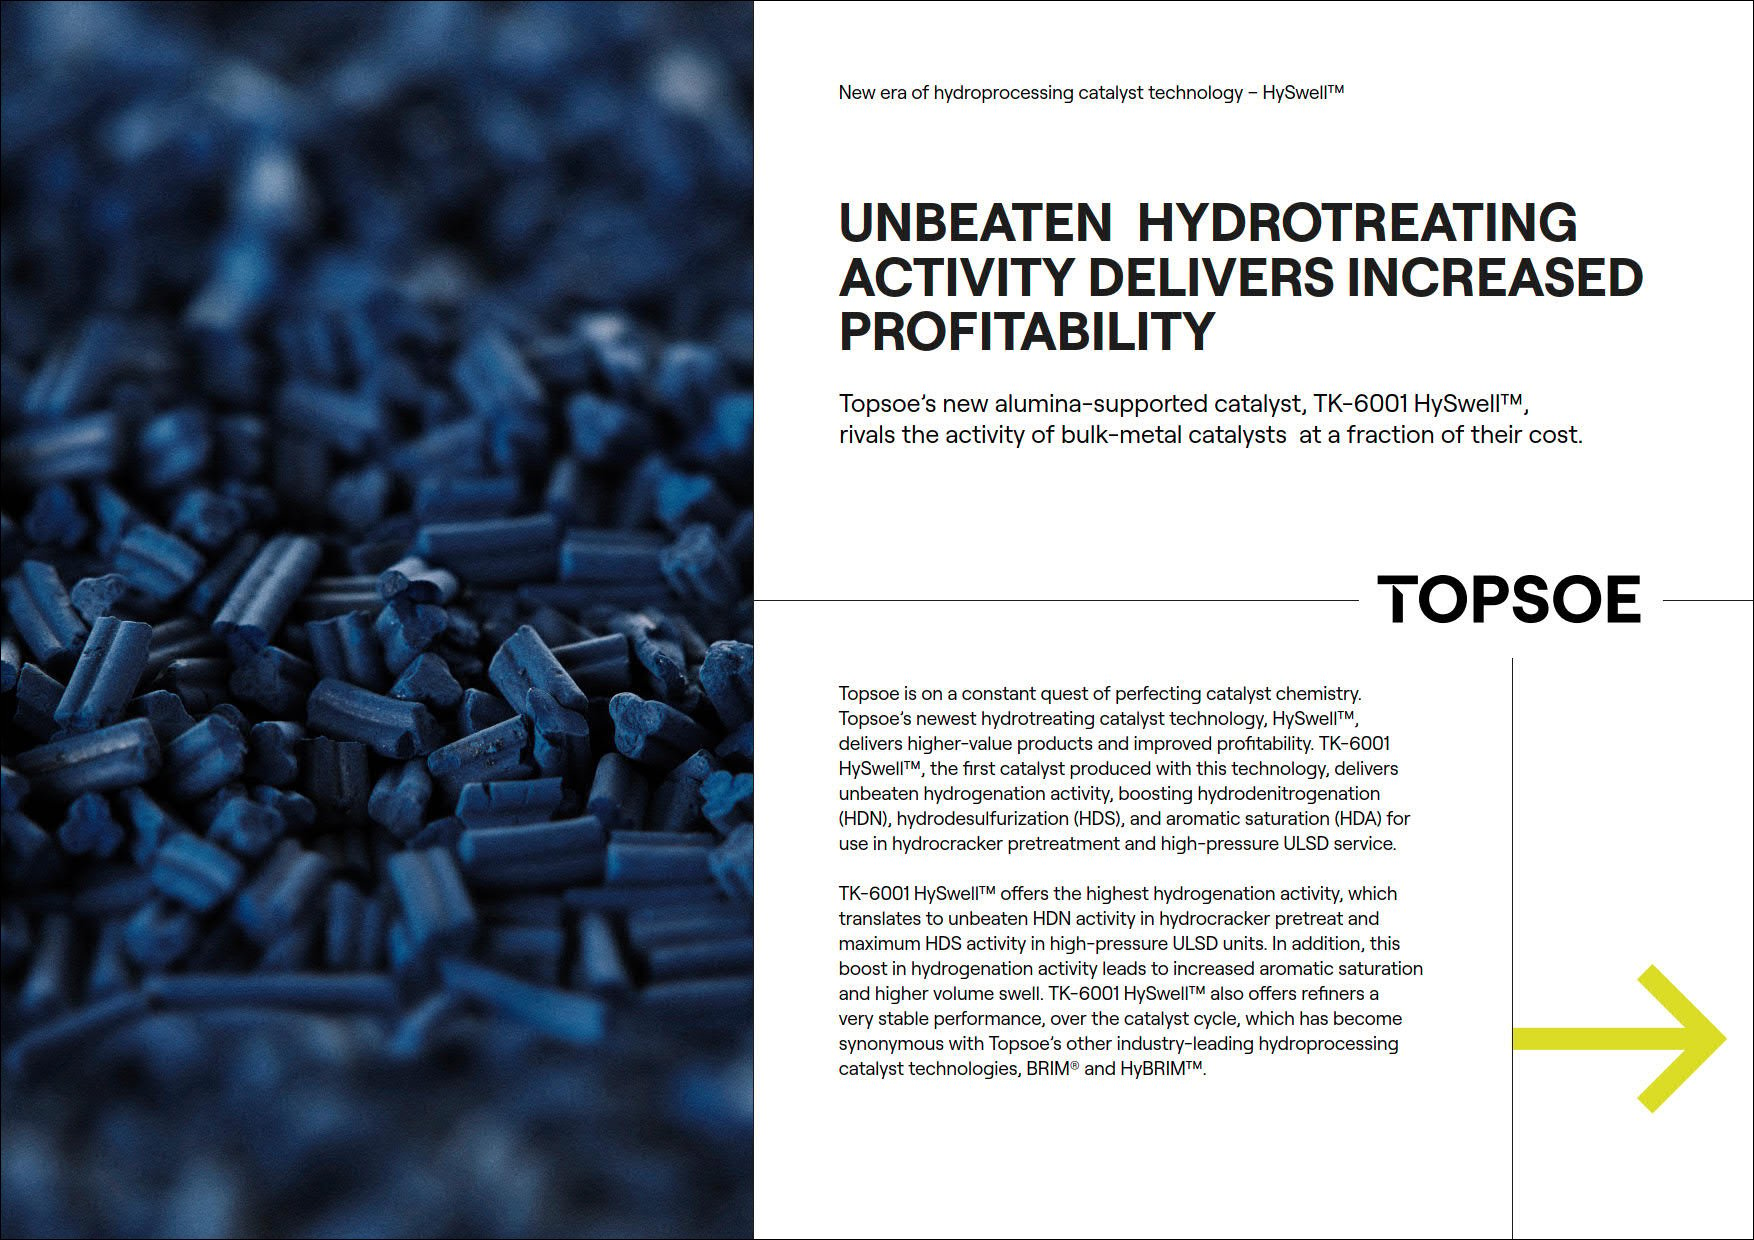 Unbeaten hydrotreating activity delivers increased profitability